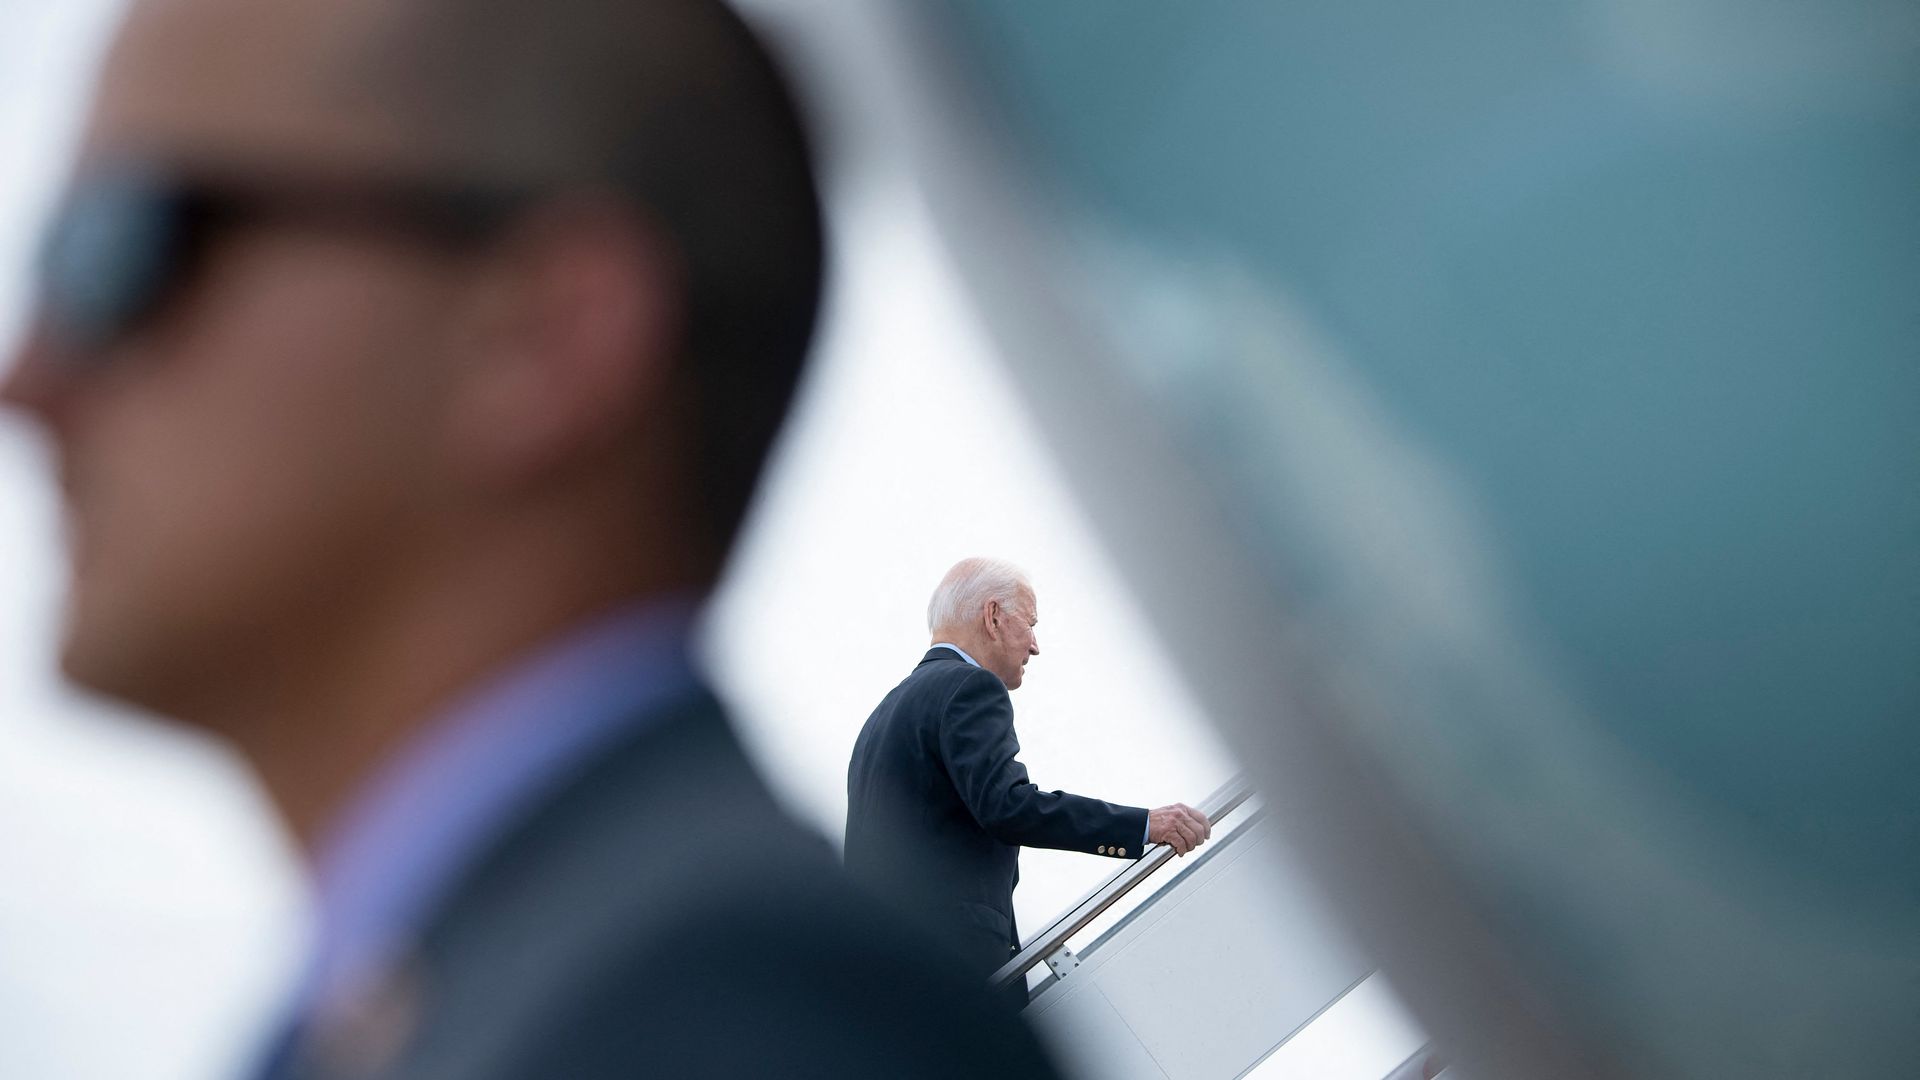 President Biden is seen boarding Air Force One before flying to Europe on Wednesday.